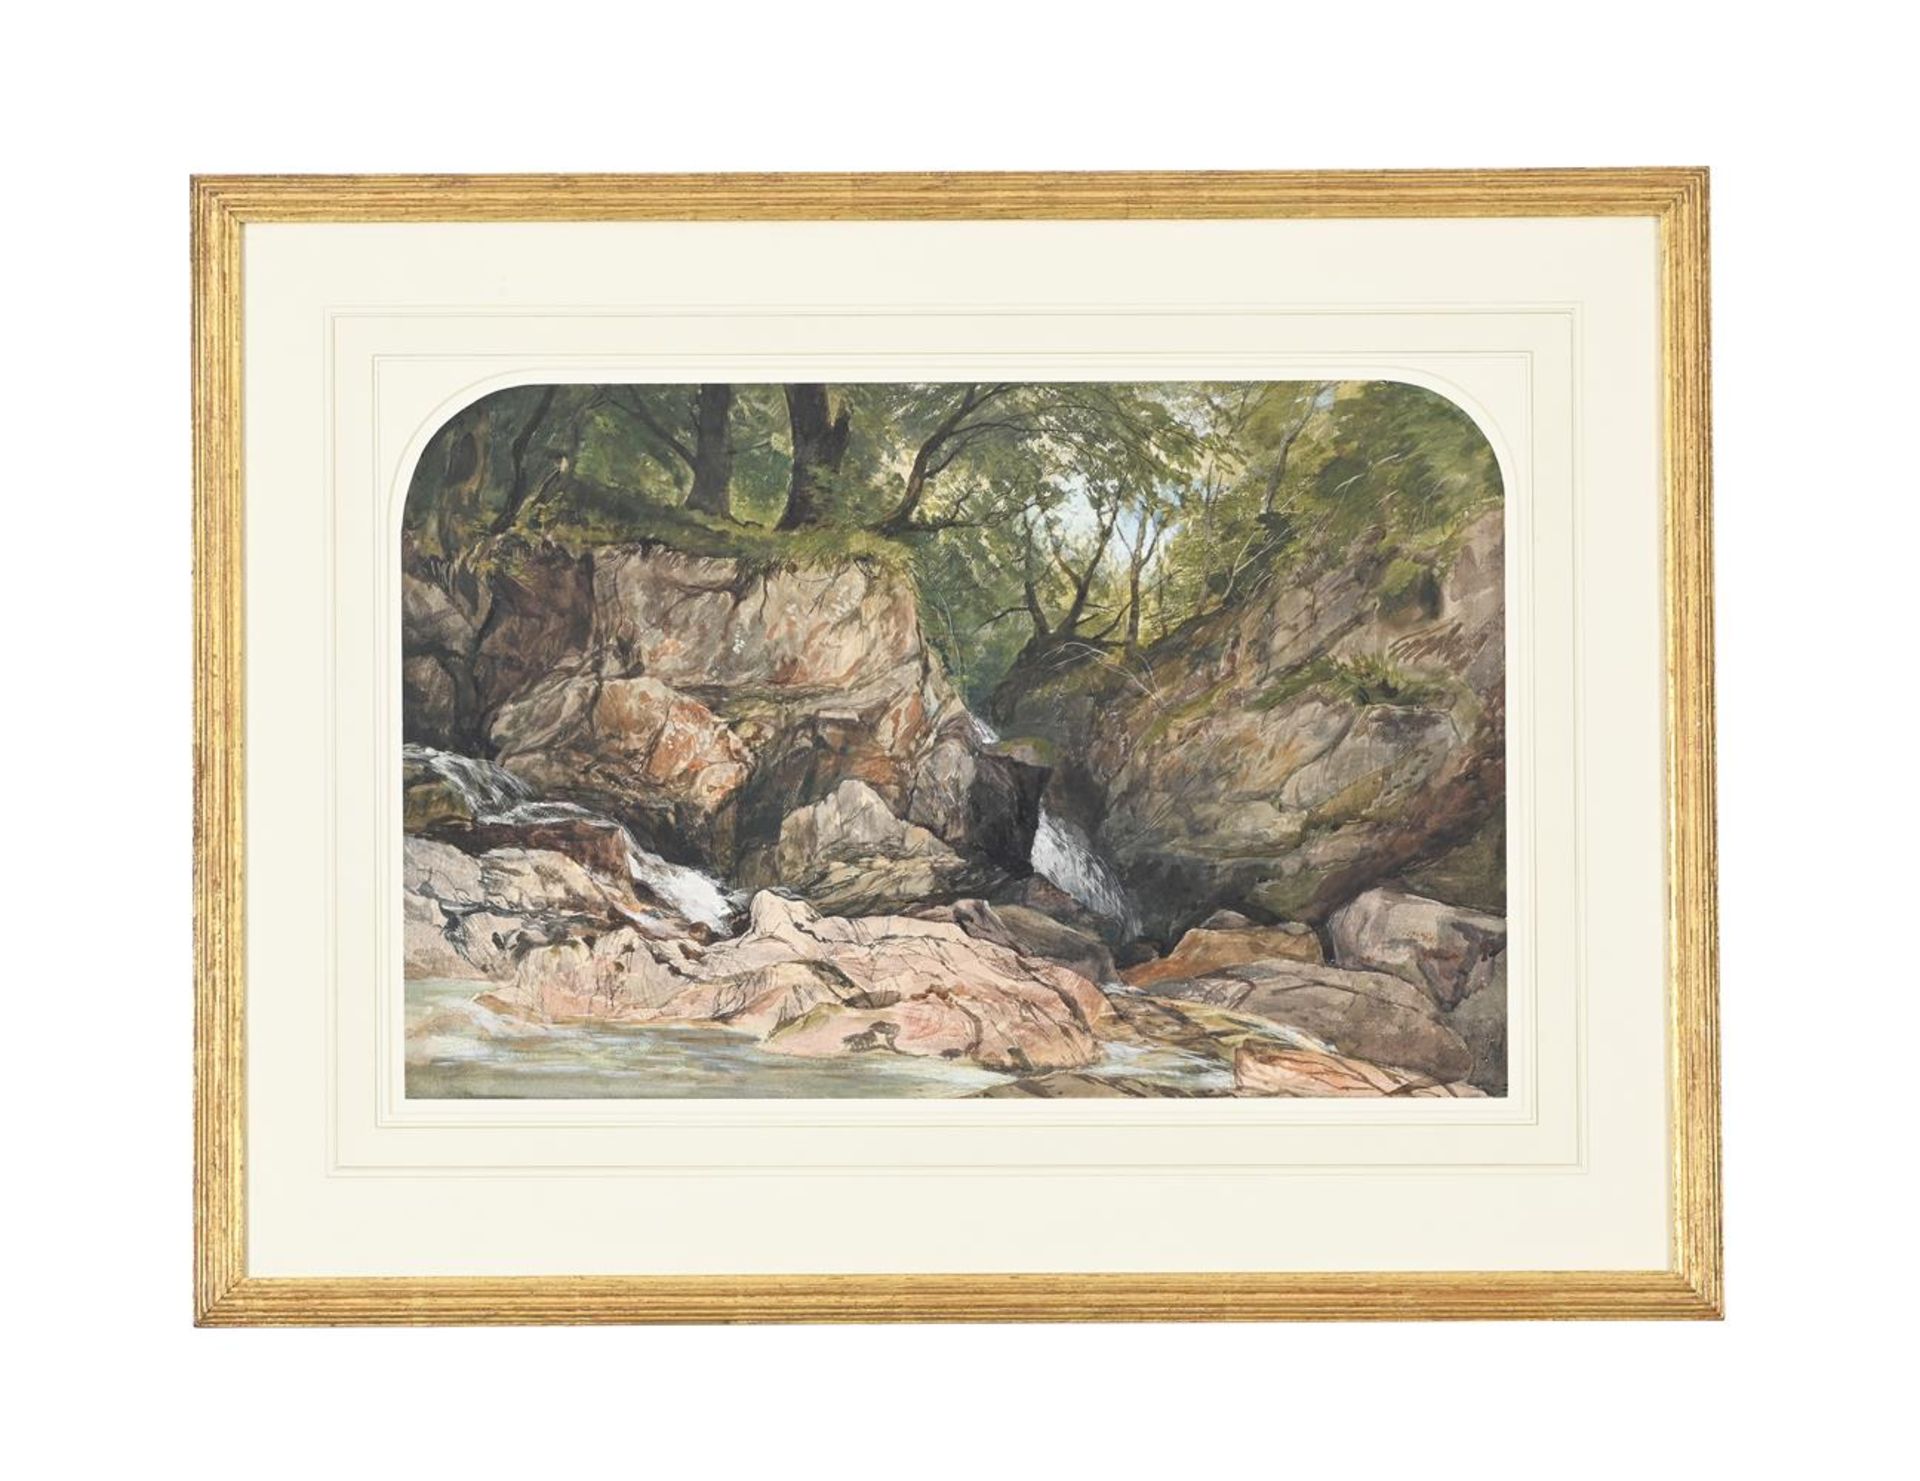 WILLIAM JAMES MÜLLER (BRITISH 1812-1845), A STREAM IN A SUNLIT GLADE - Image 2 of 2